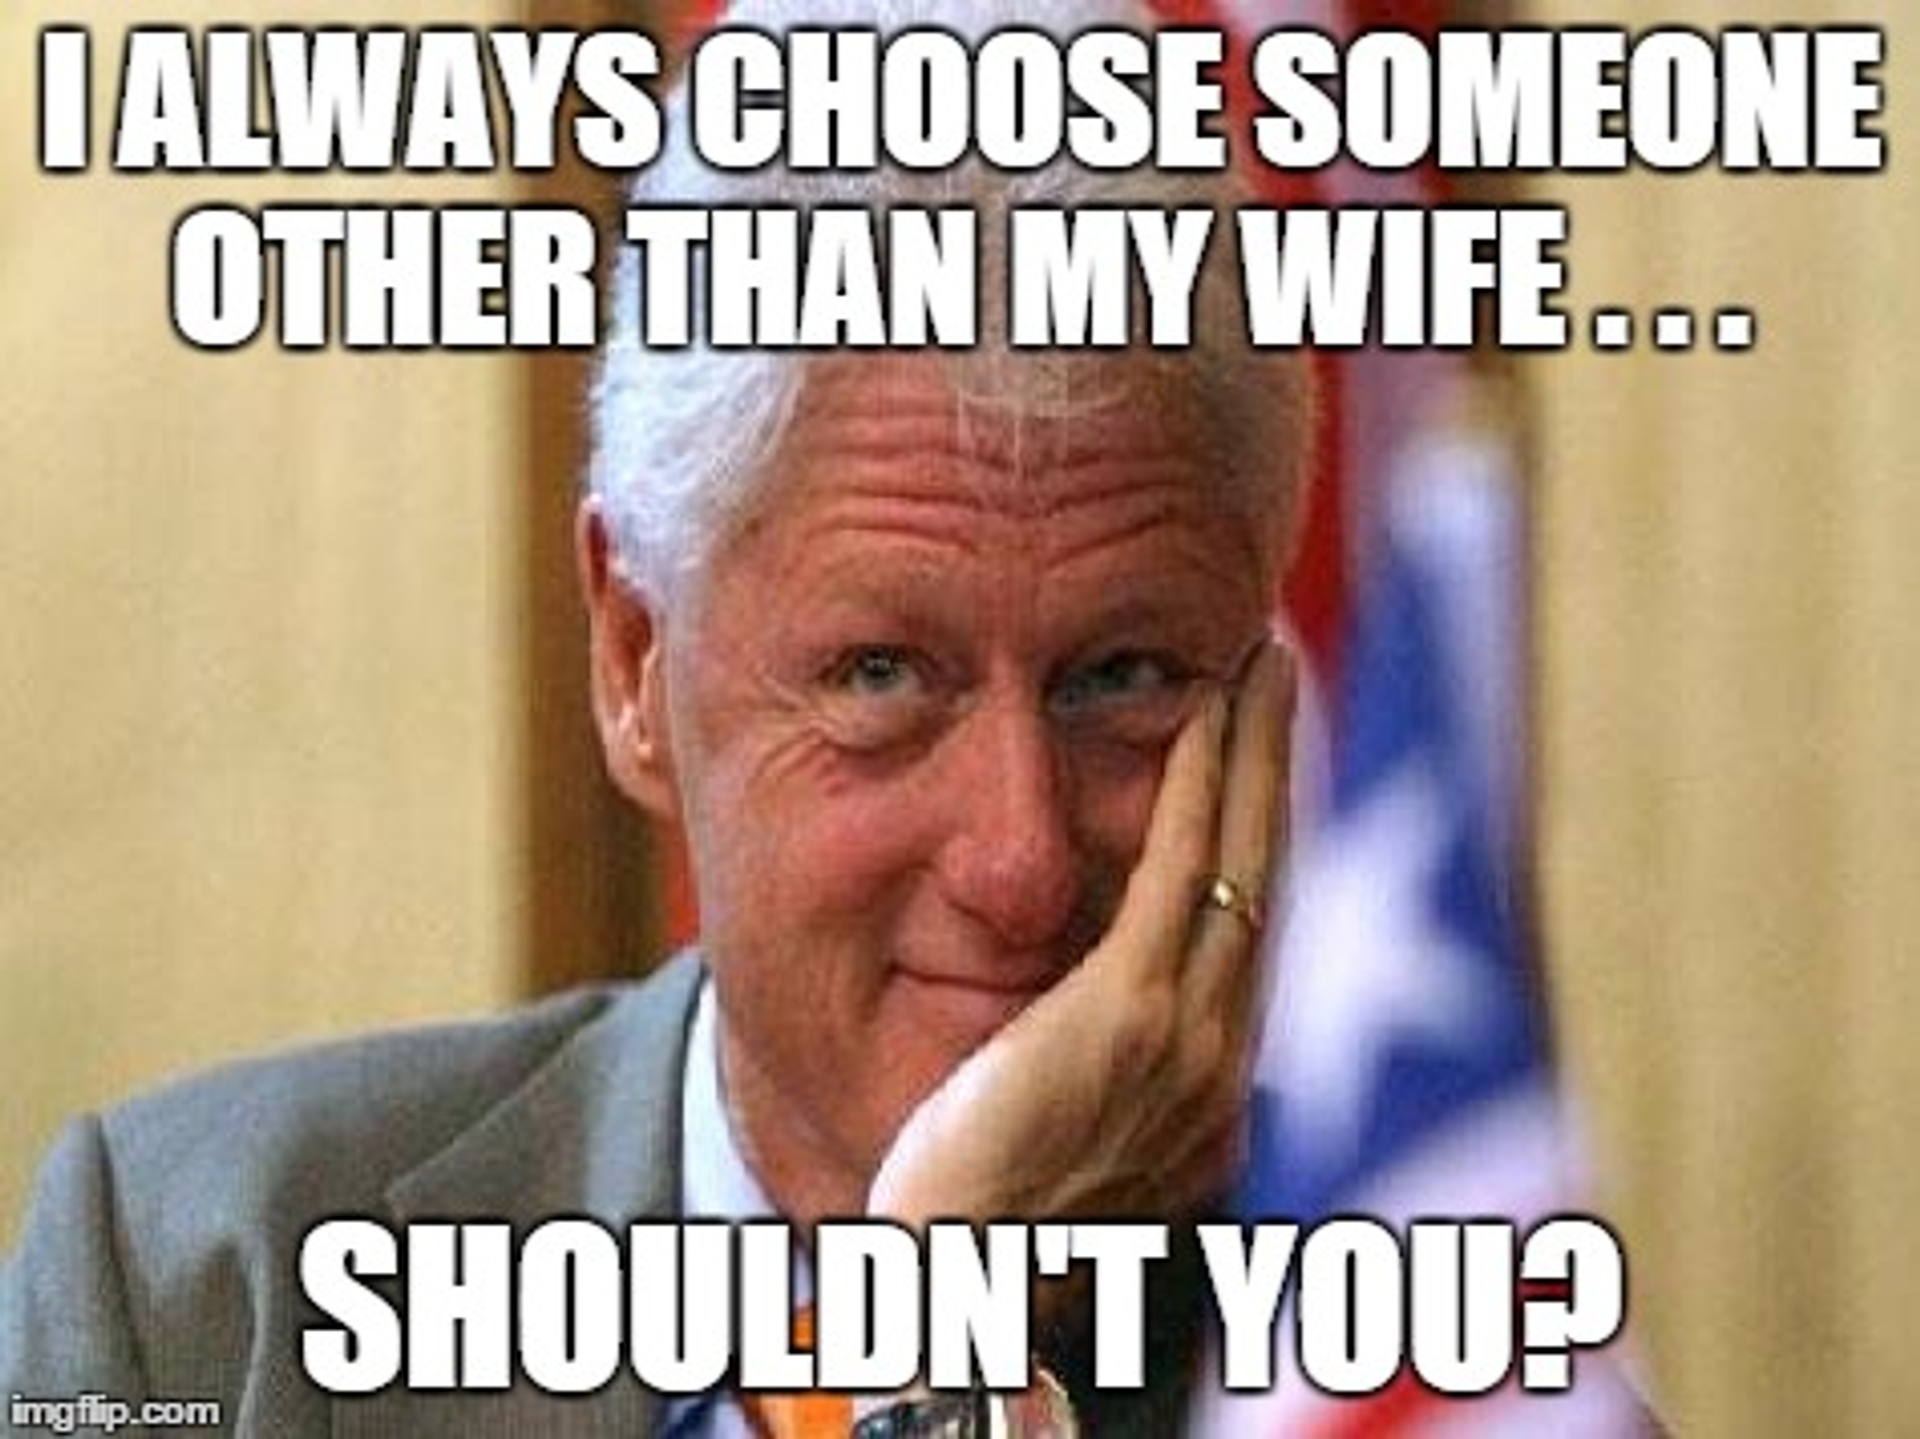 Clinton Other than my wife